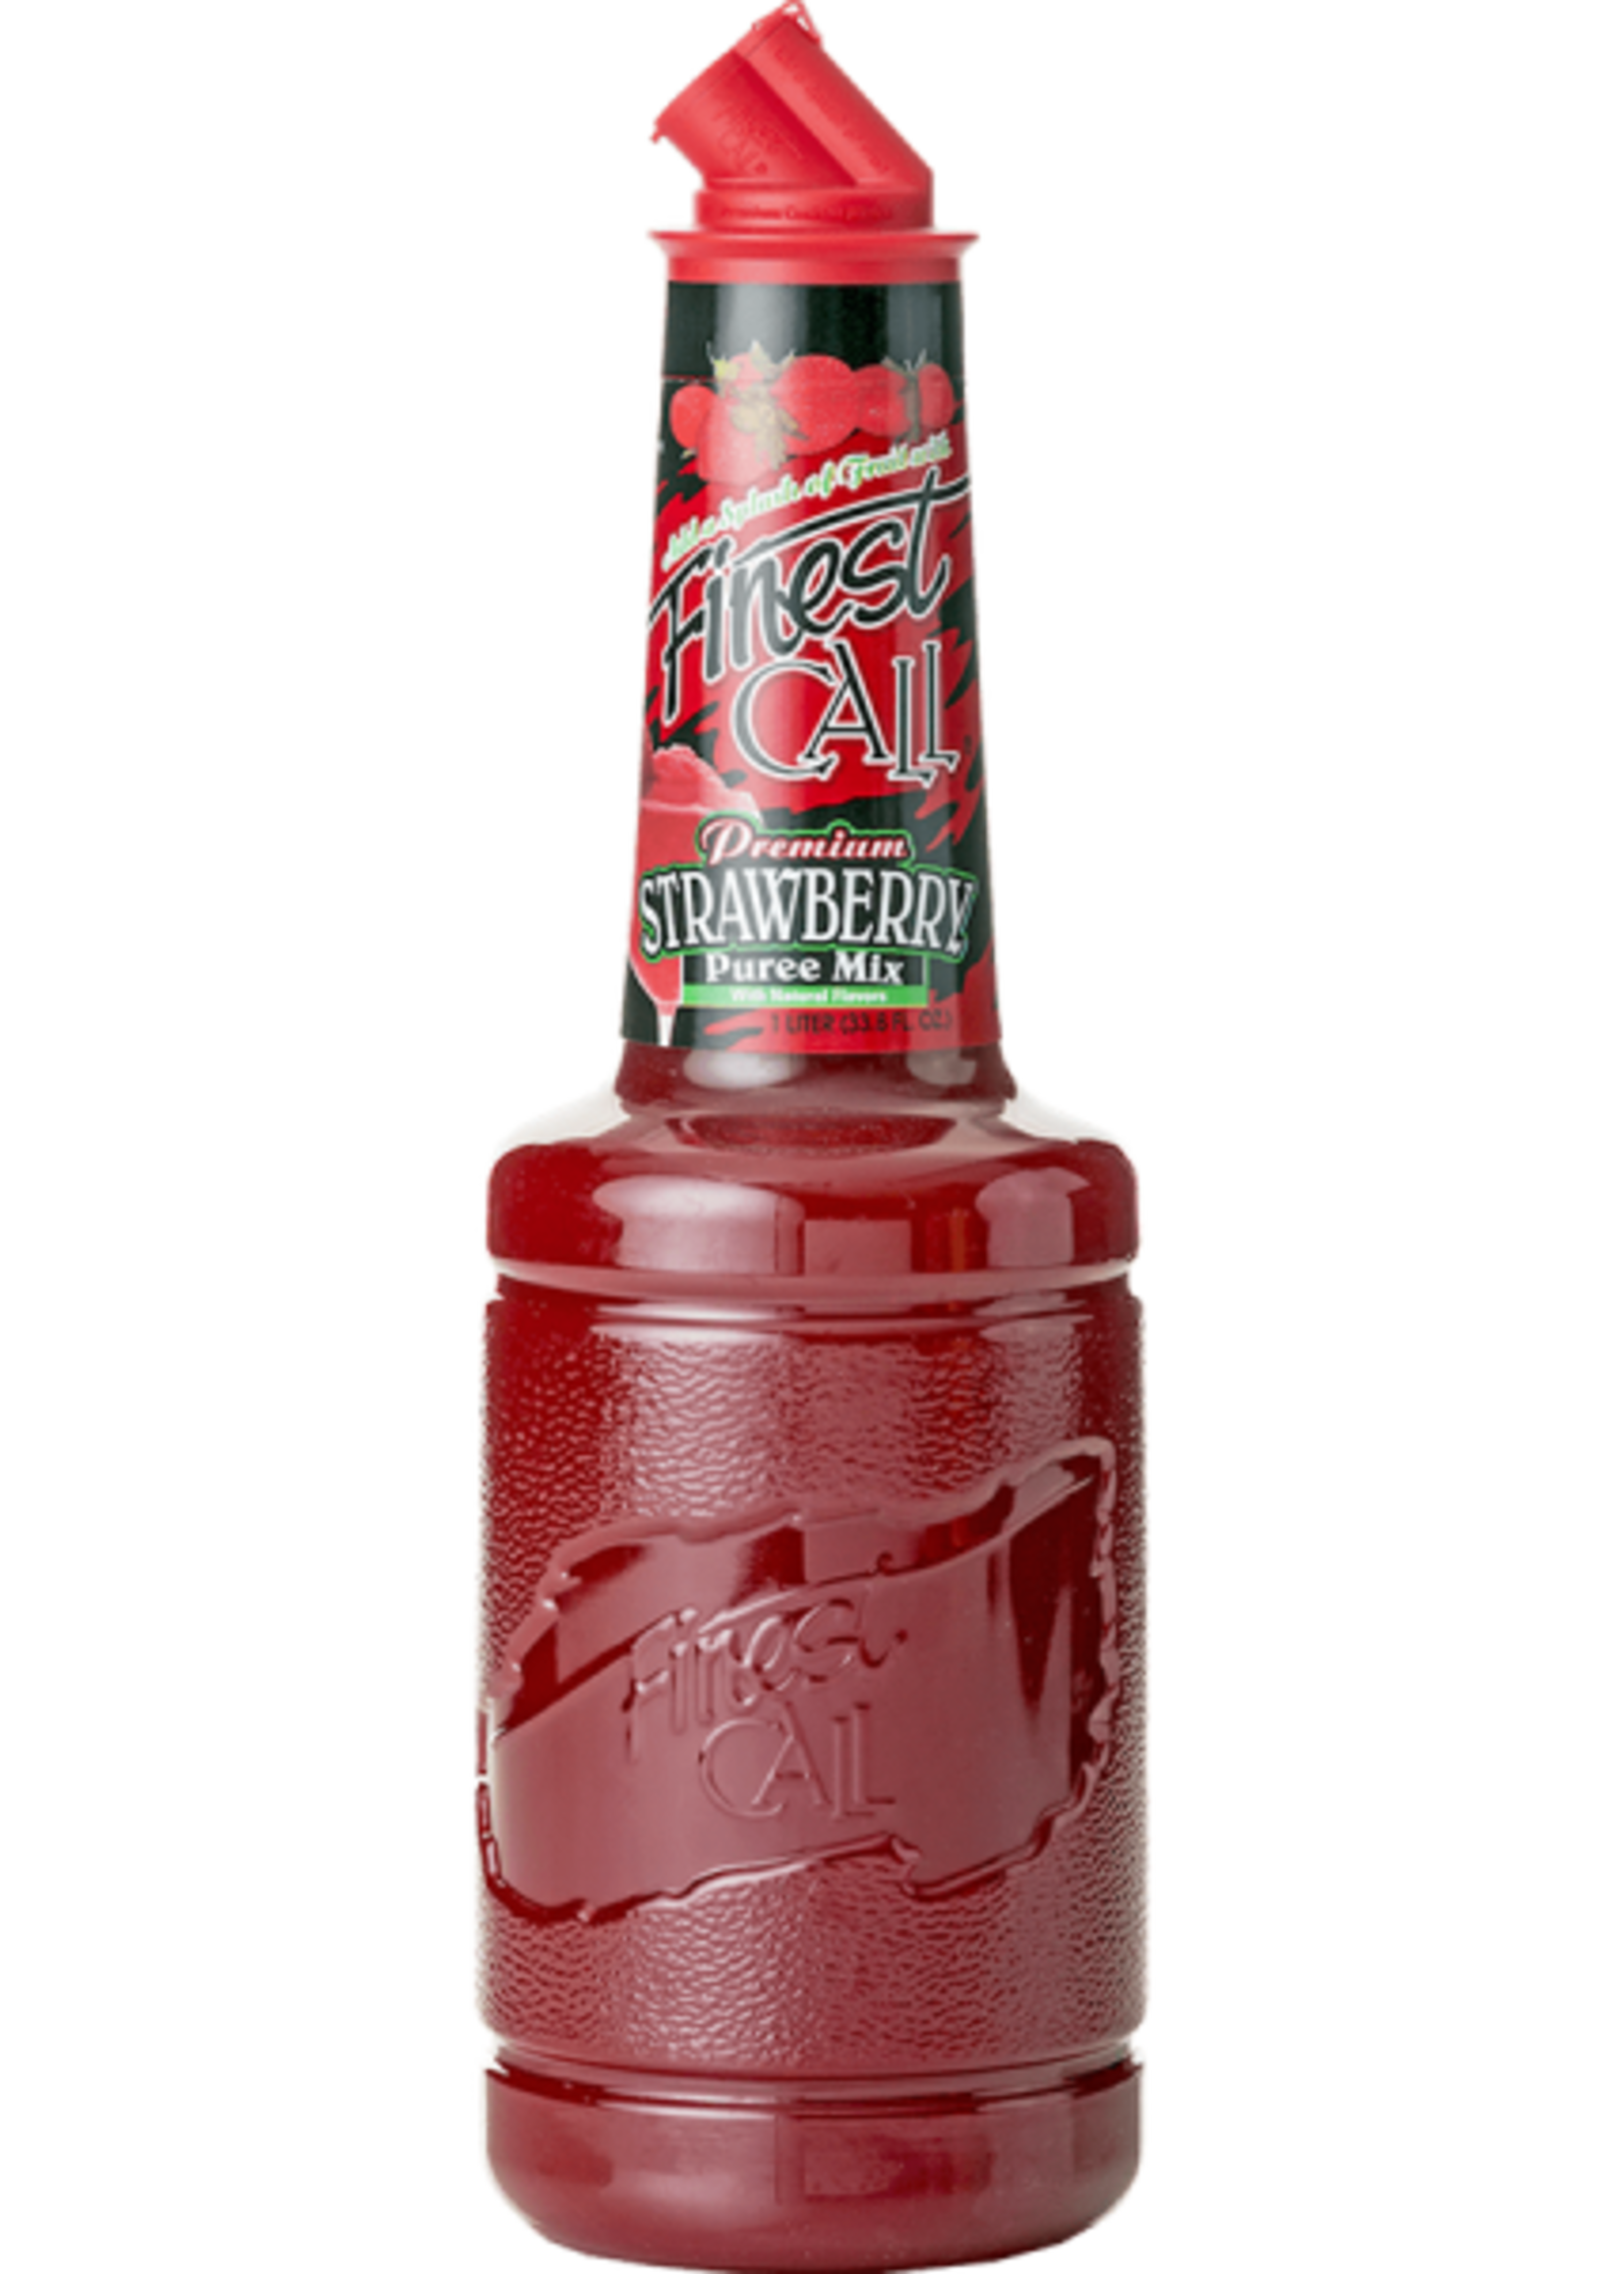 Finest Call Finest Call Strawberry Puree  Mix 1 Ltr